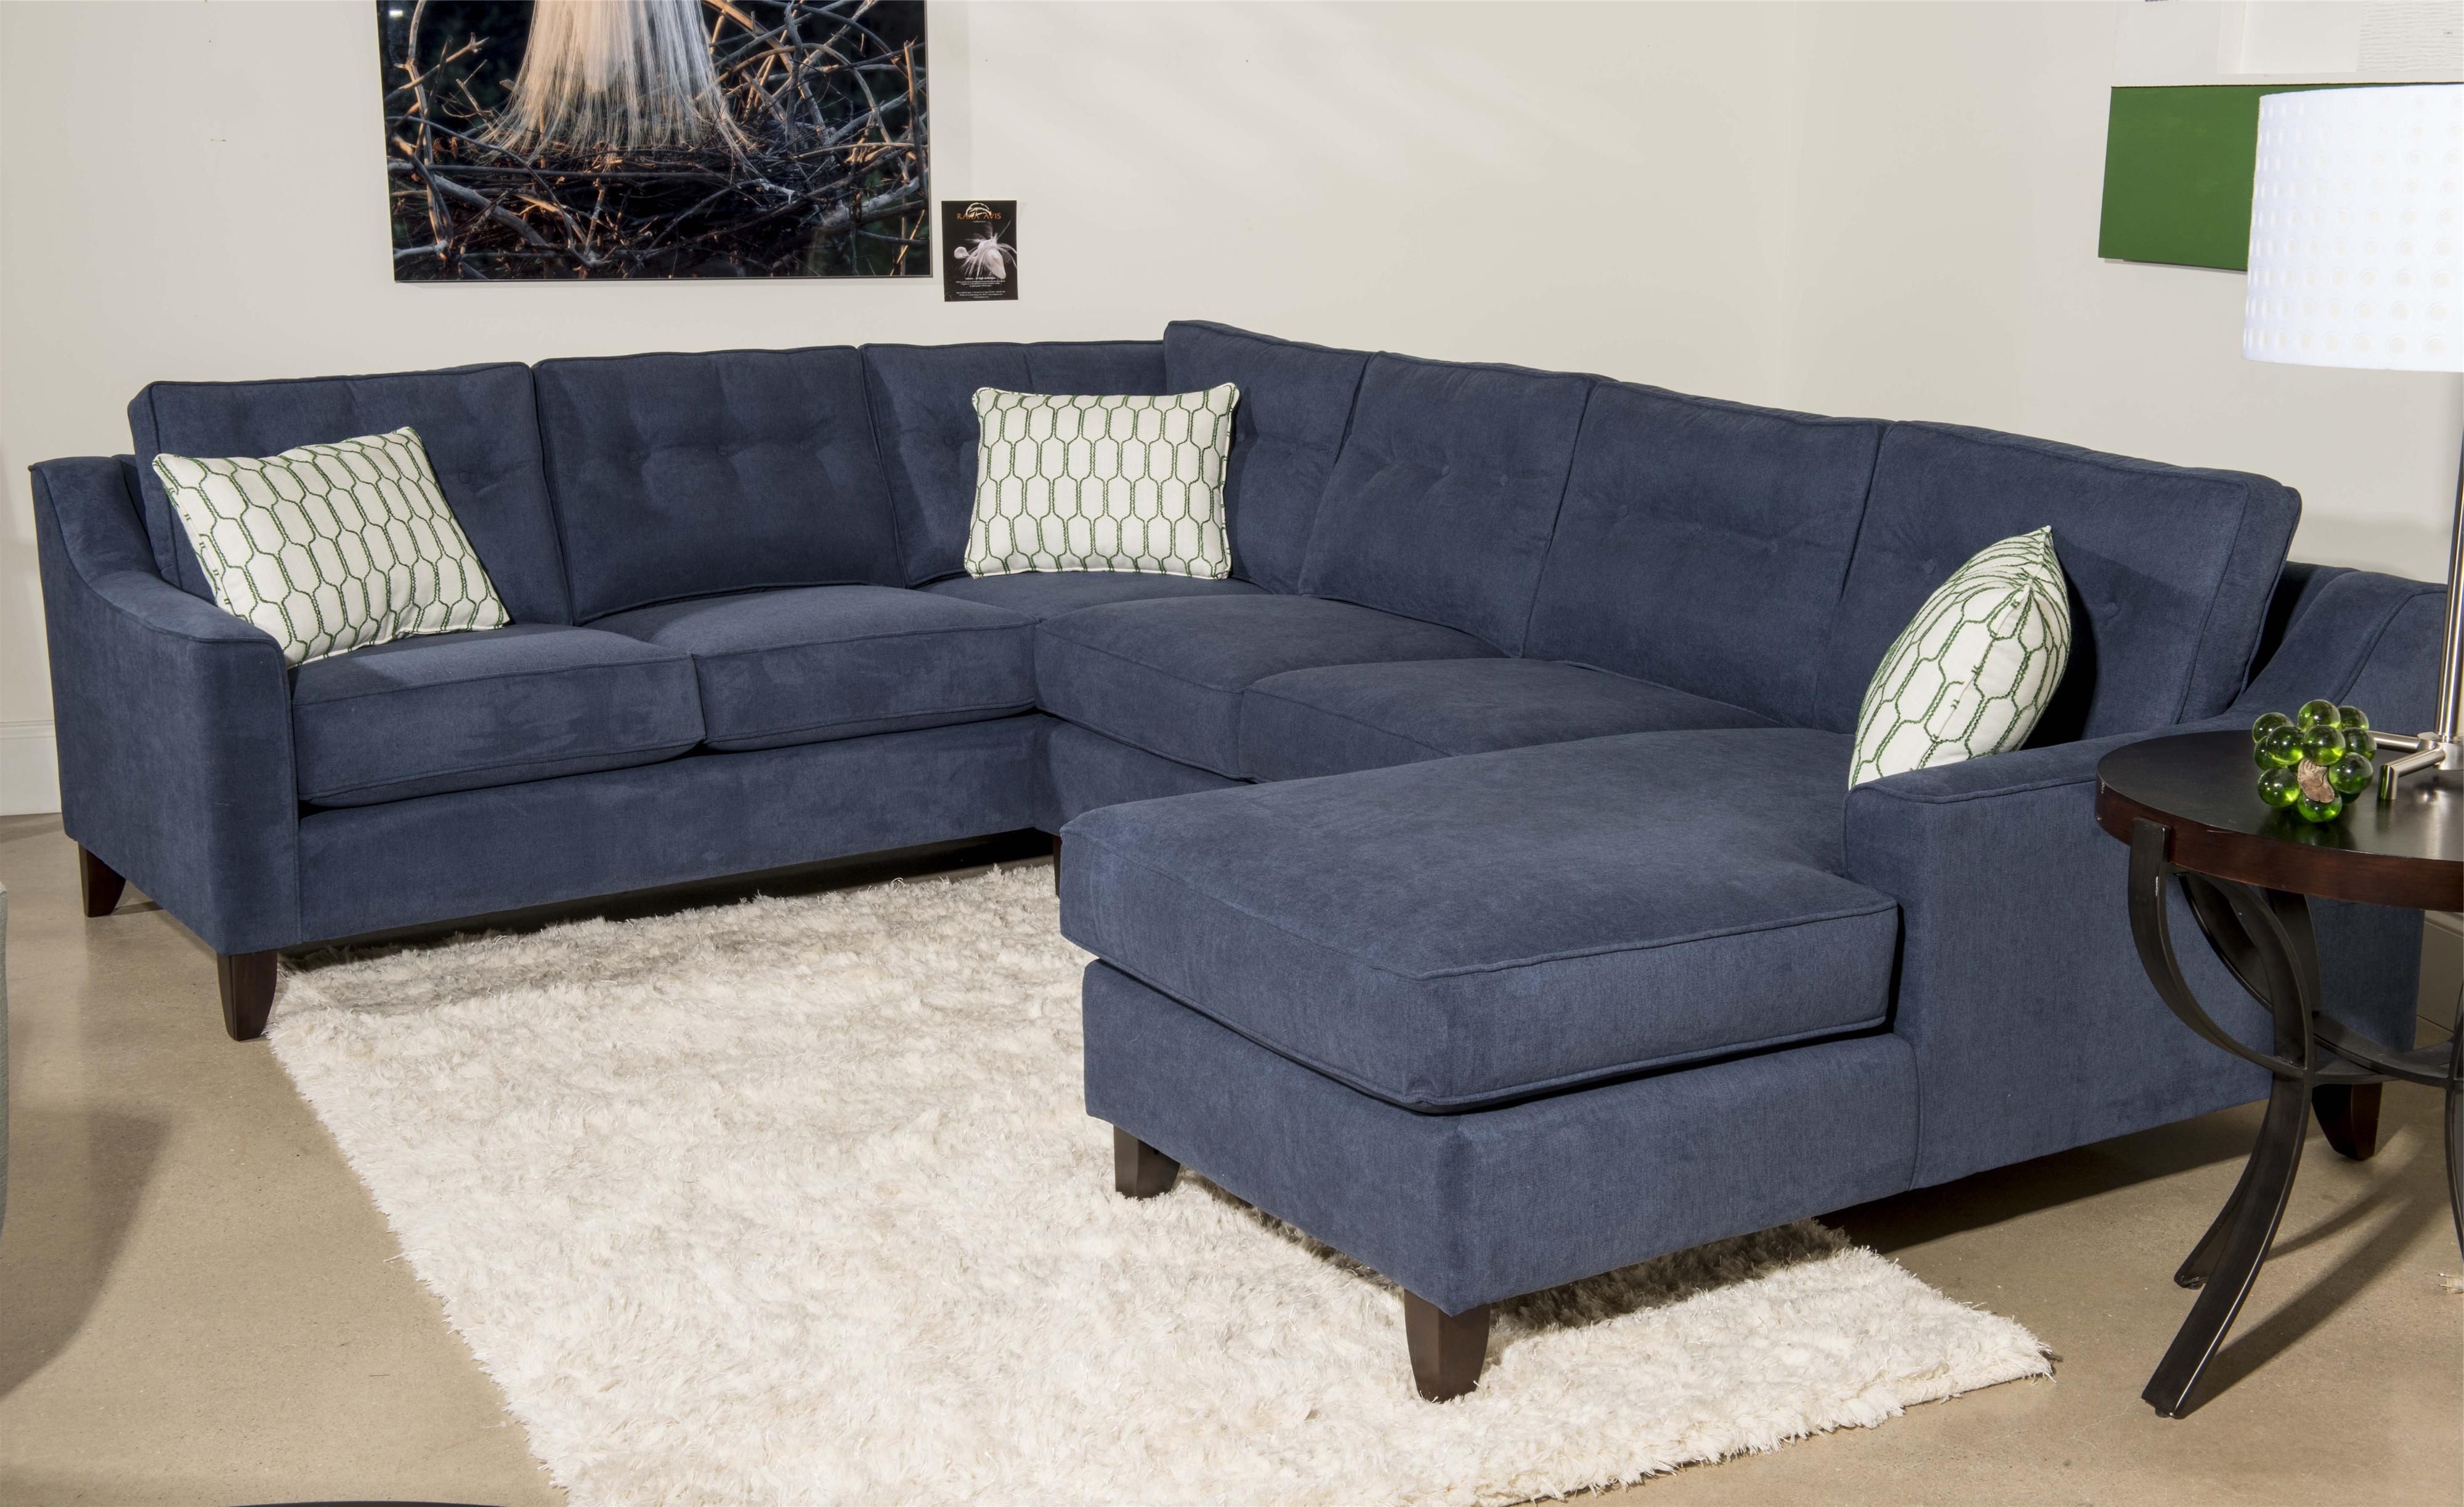 Most Recent Contemporary 3 Piece Sectional Sofa With Chaiseklaussner With Regard To Gardiners Sectional Sofas (View 13 of 15)